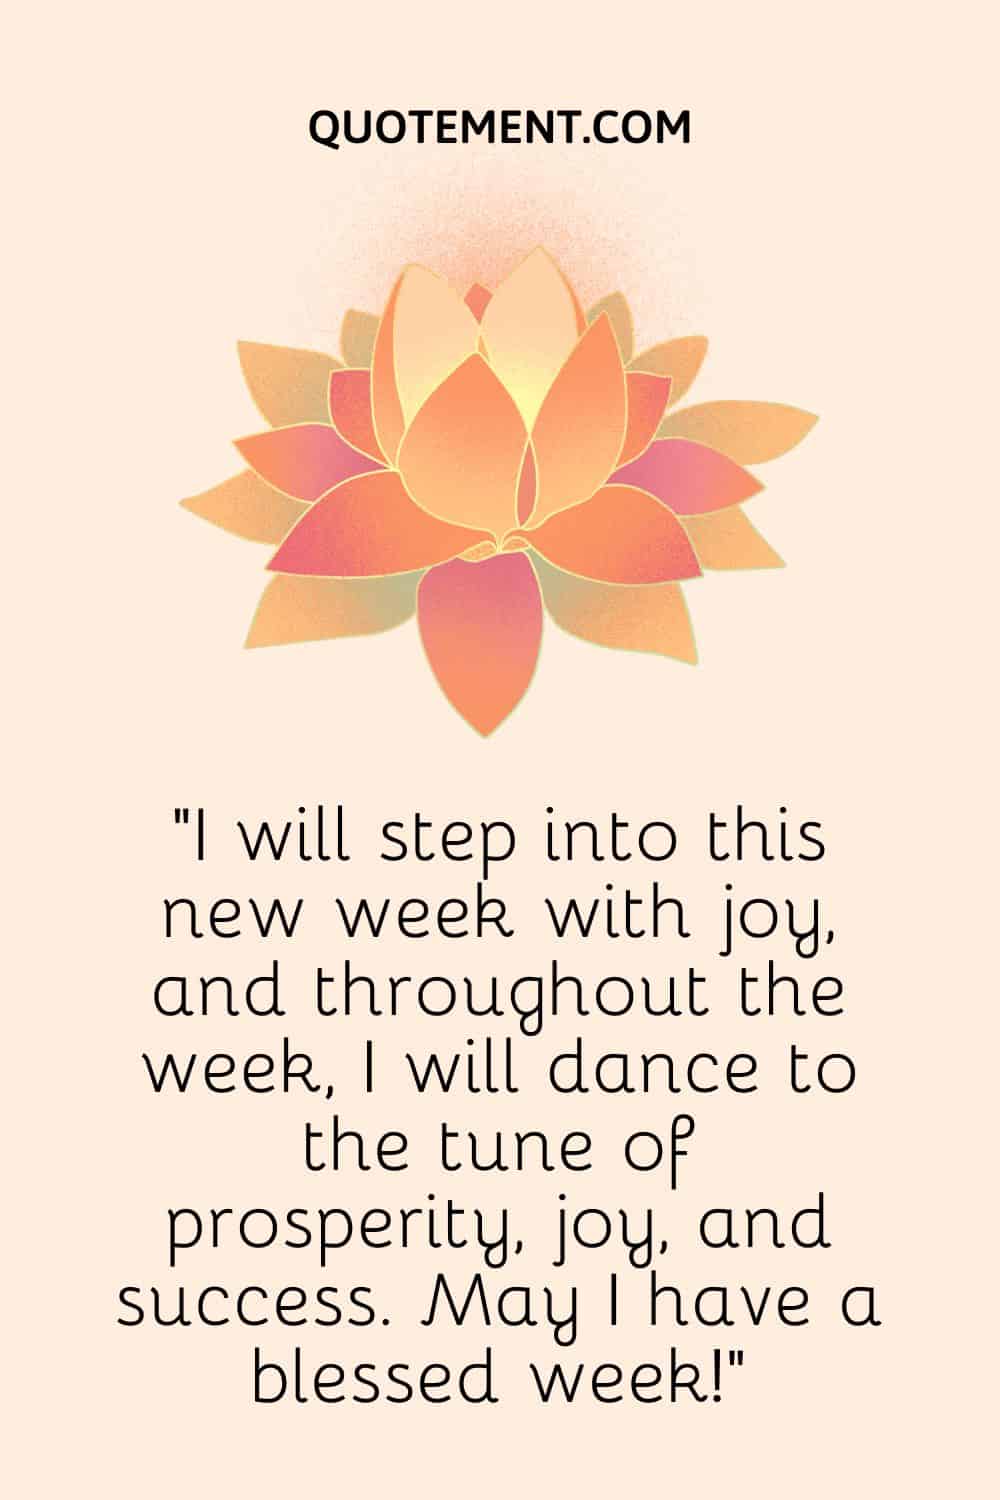 I will step into this new week with joy